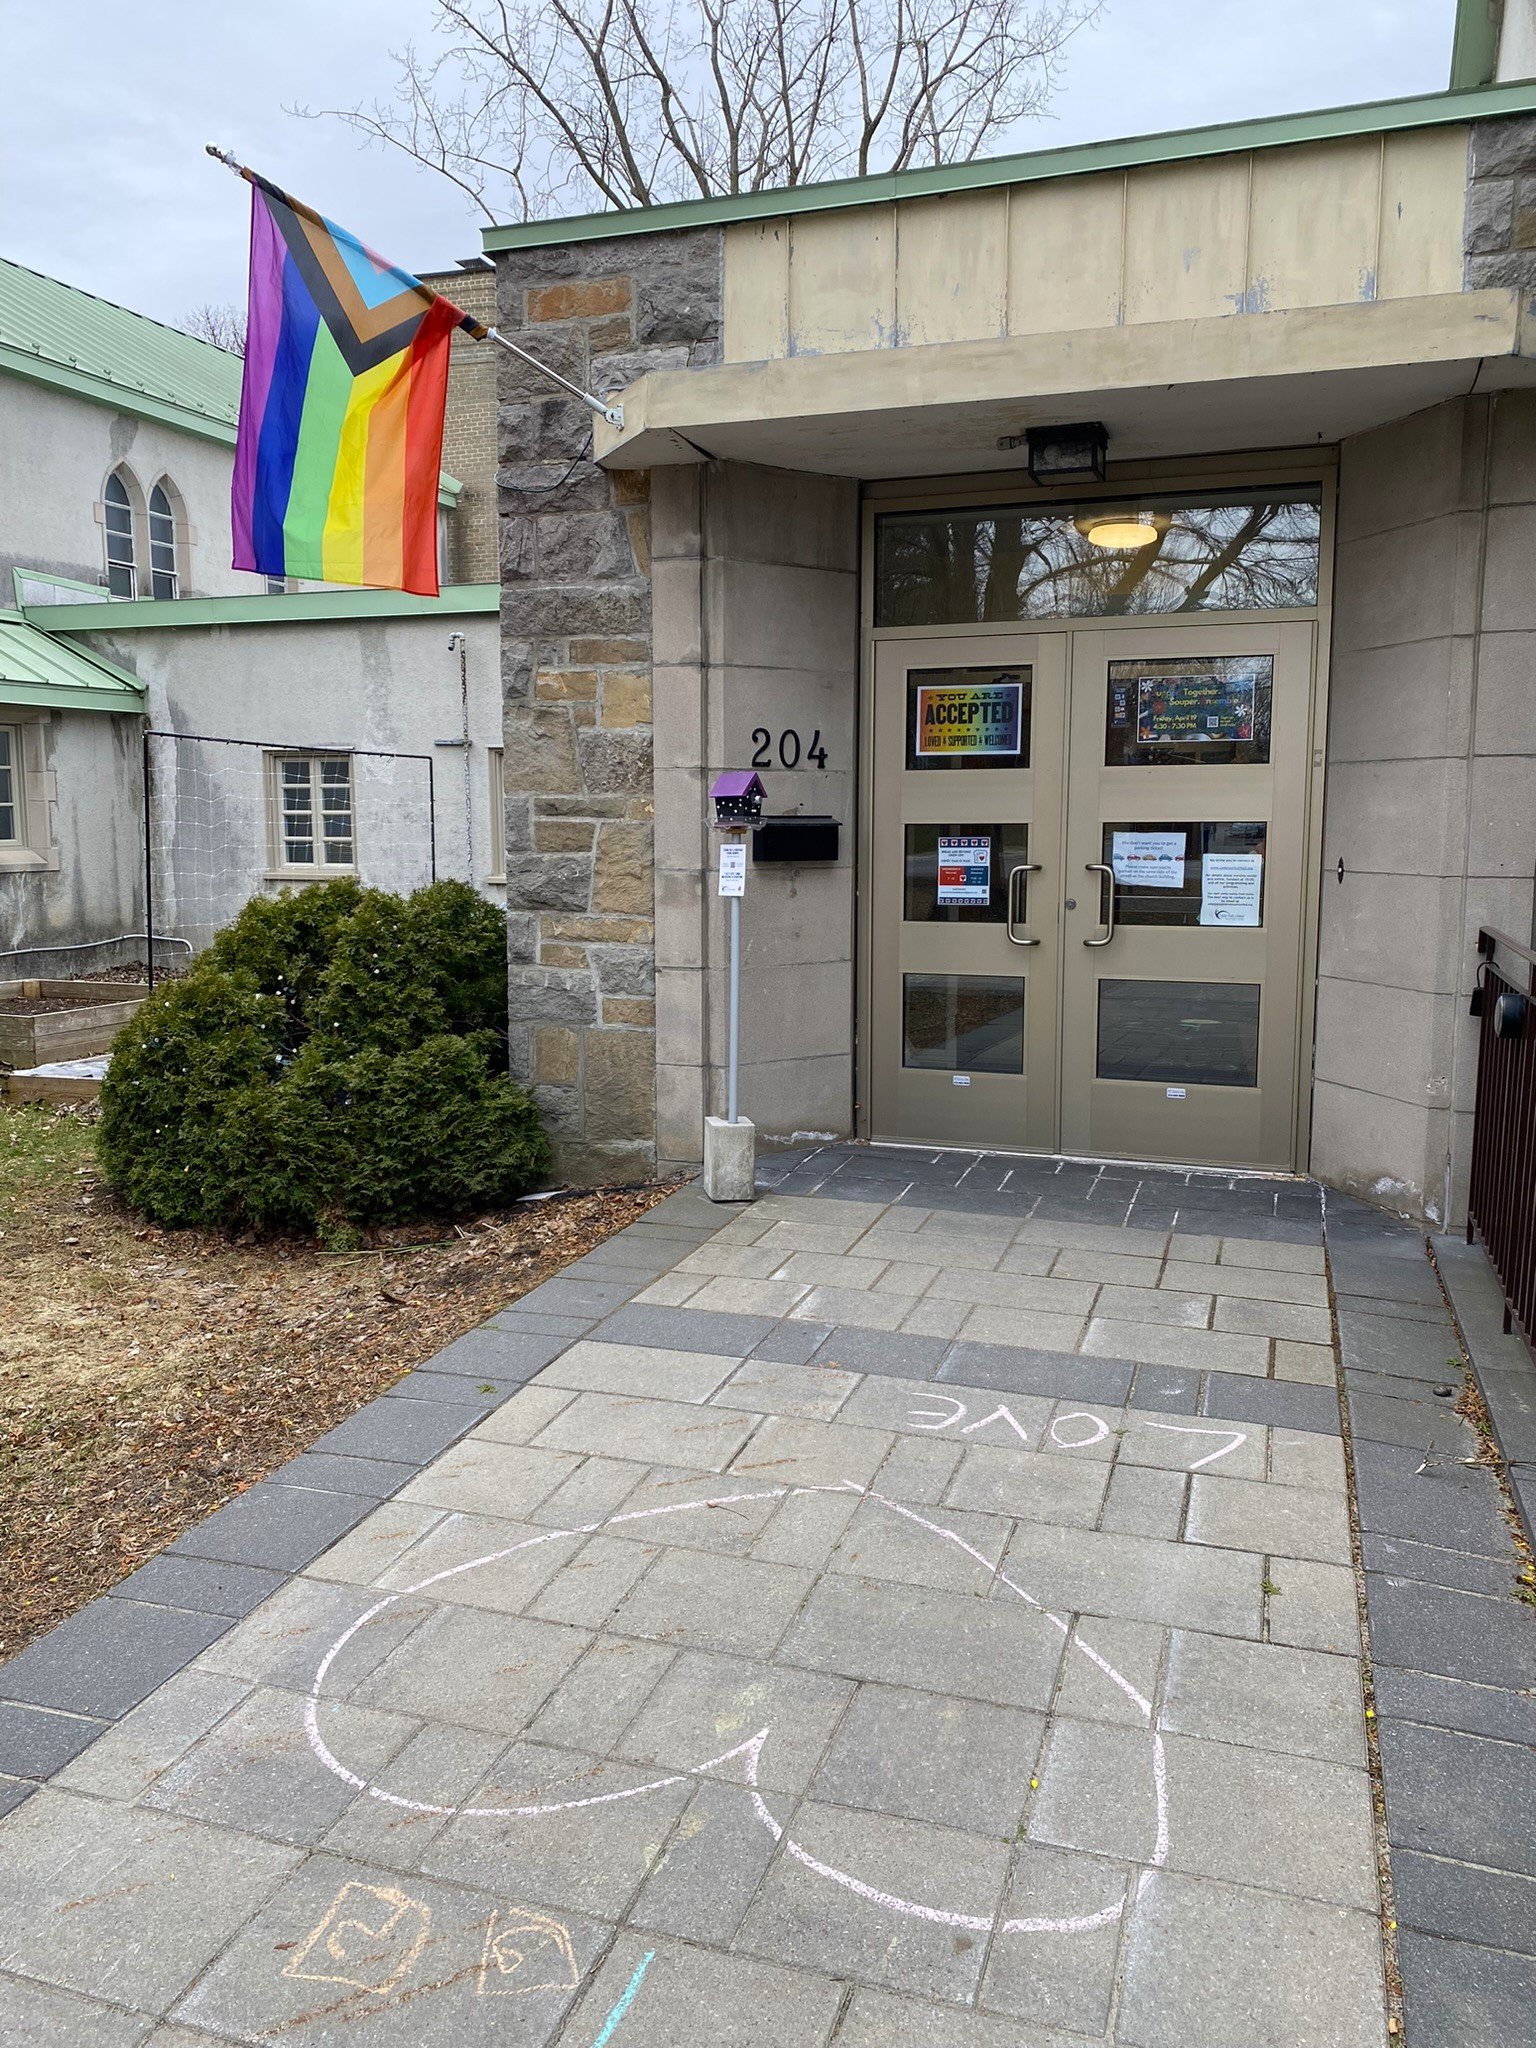 Tomorrow's Wednesday! 🌈 

That means the door under the rainbow flag will be open from 9 to 12 for you to

🥫 Drop off meals for the Comfort Food Freezer (or take a meal if you could use one)
🍲 Drop off food for the Comfort Pantry (or take food if 